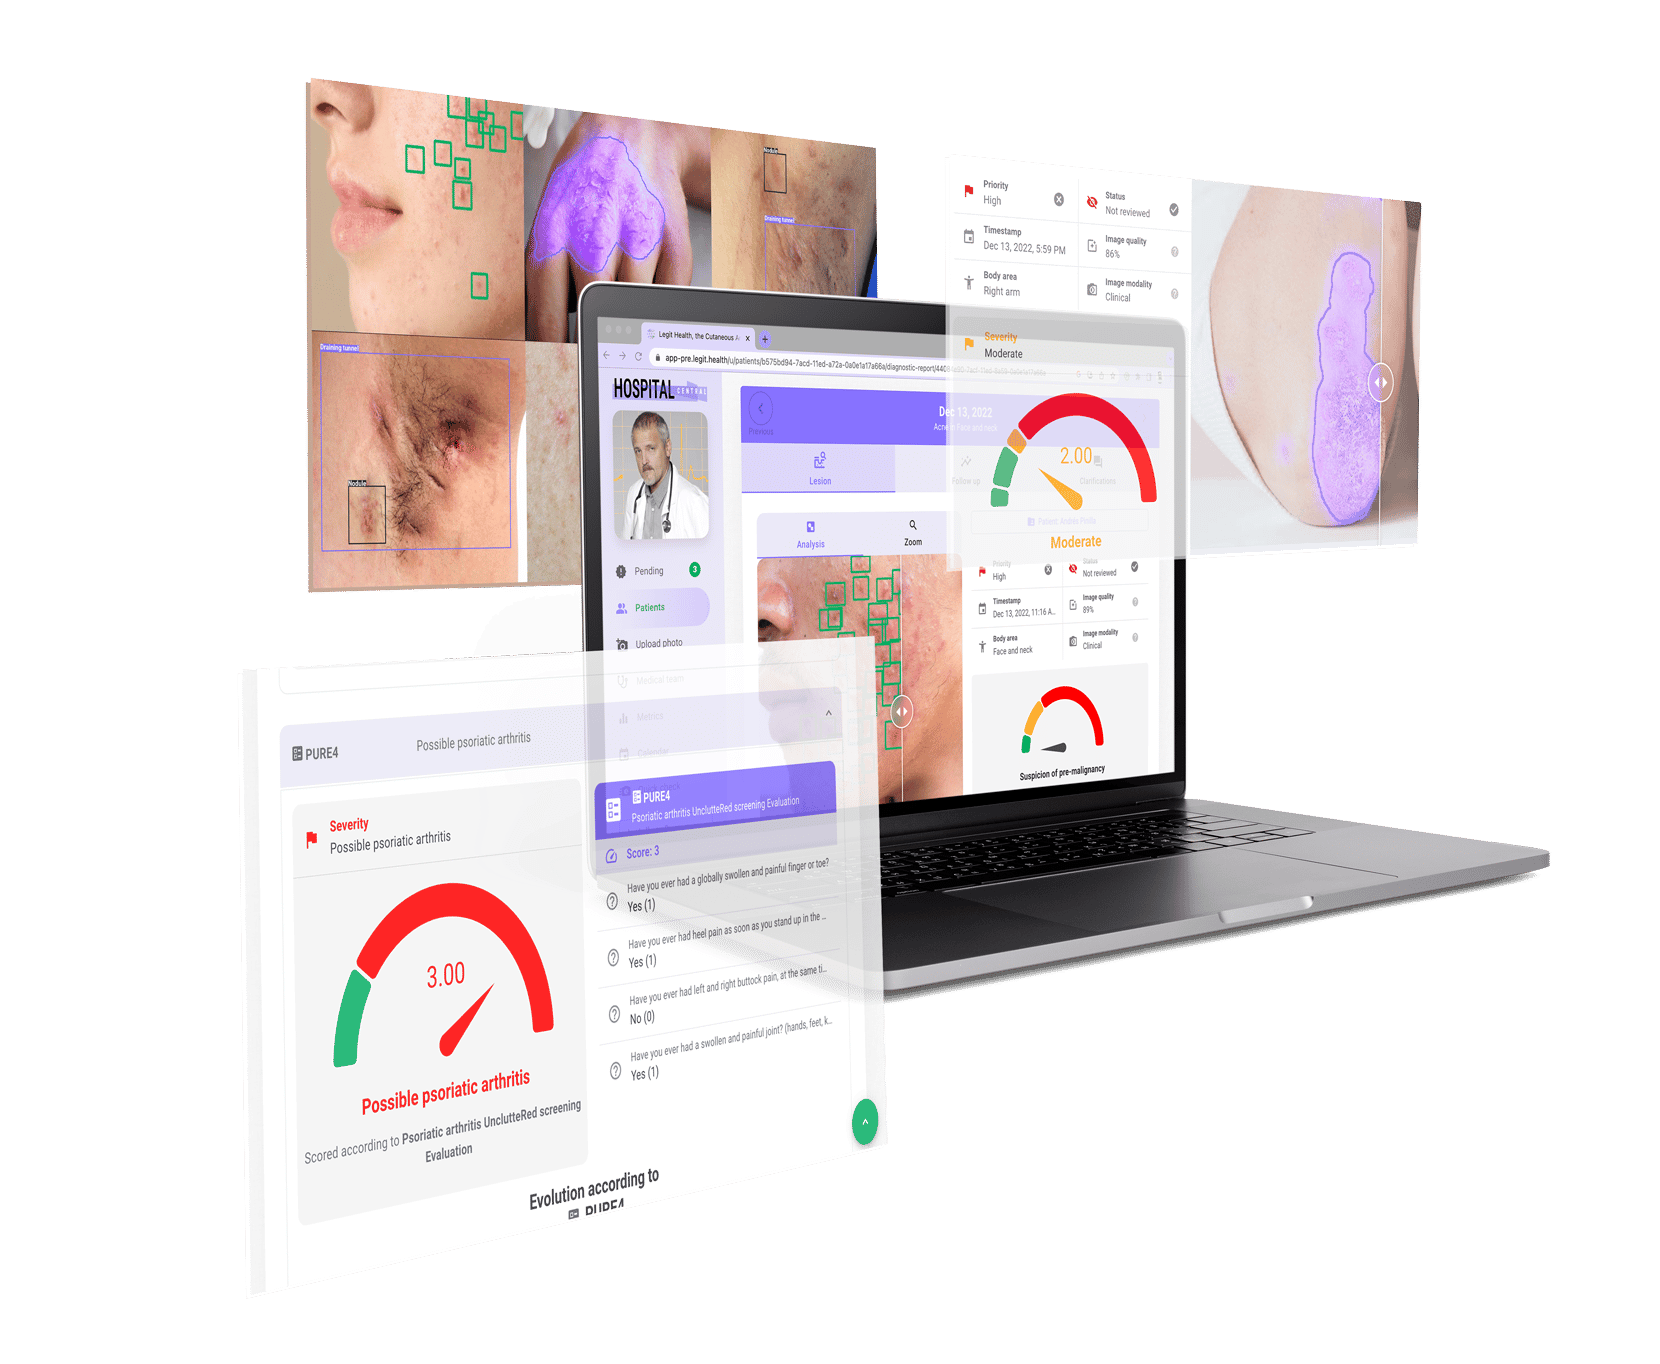 The best dermatology artificial intelligence for doctors